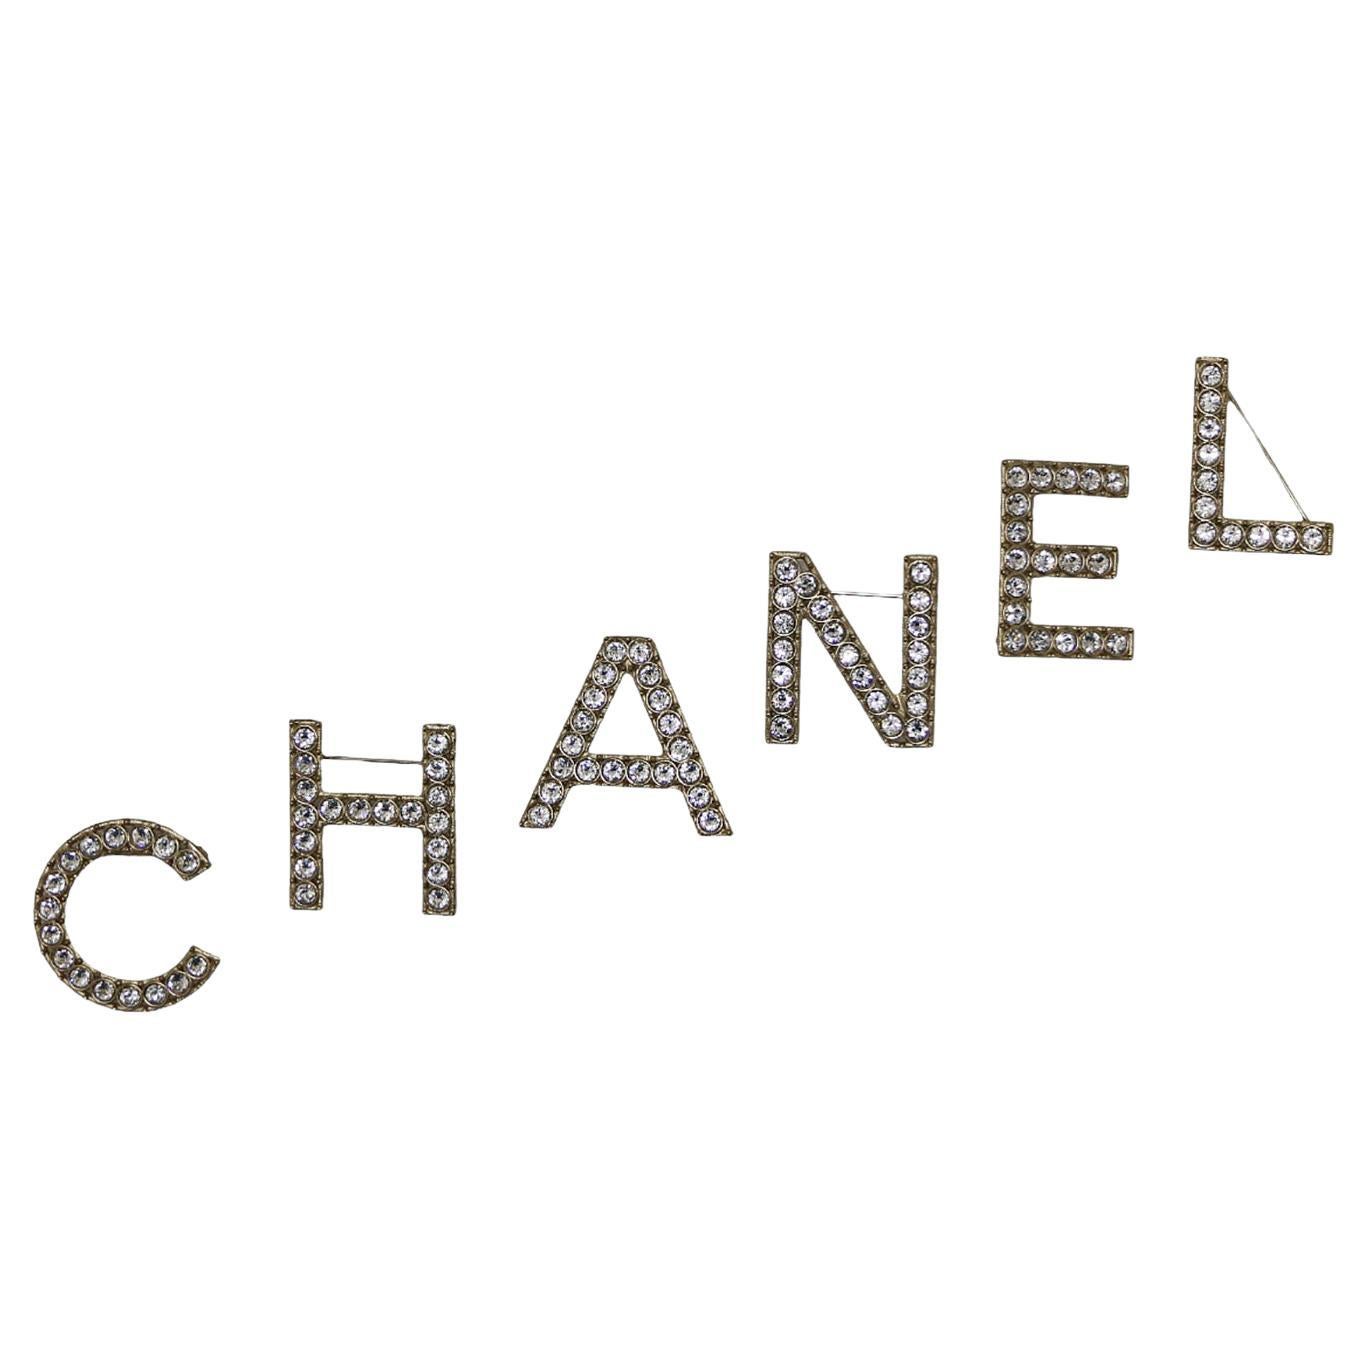 CHANEL Brooch  "C H A N E L" For Sale